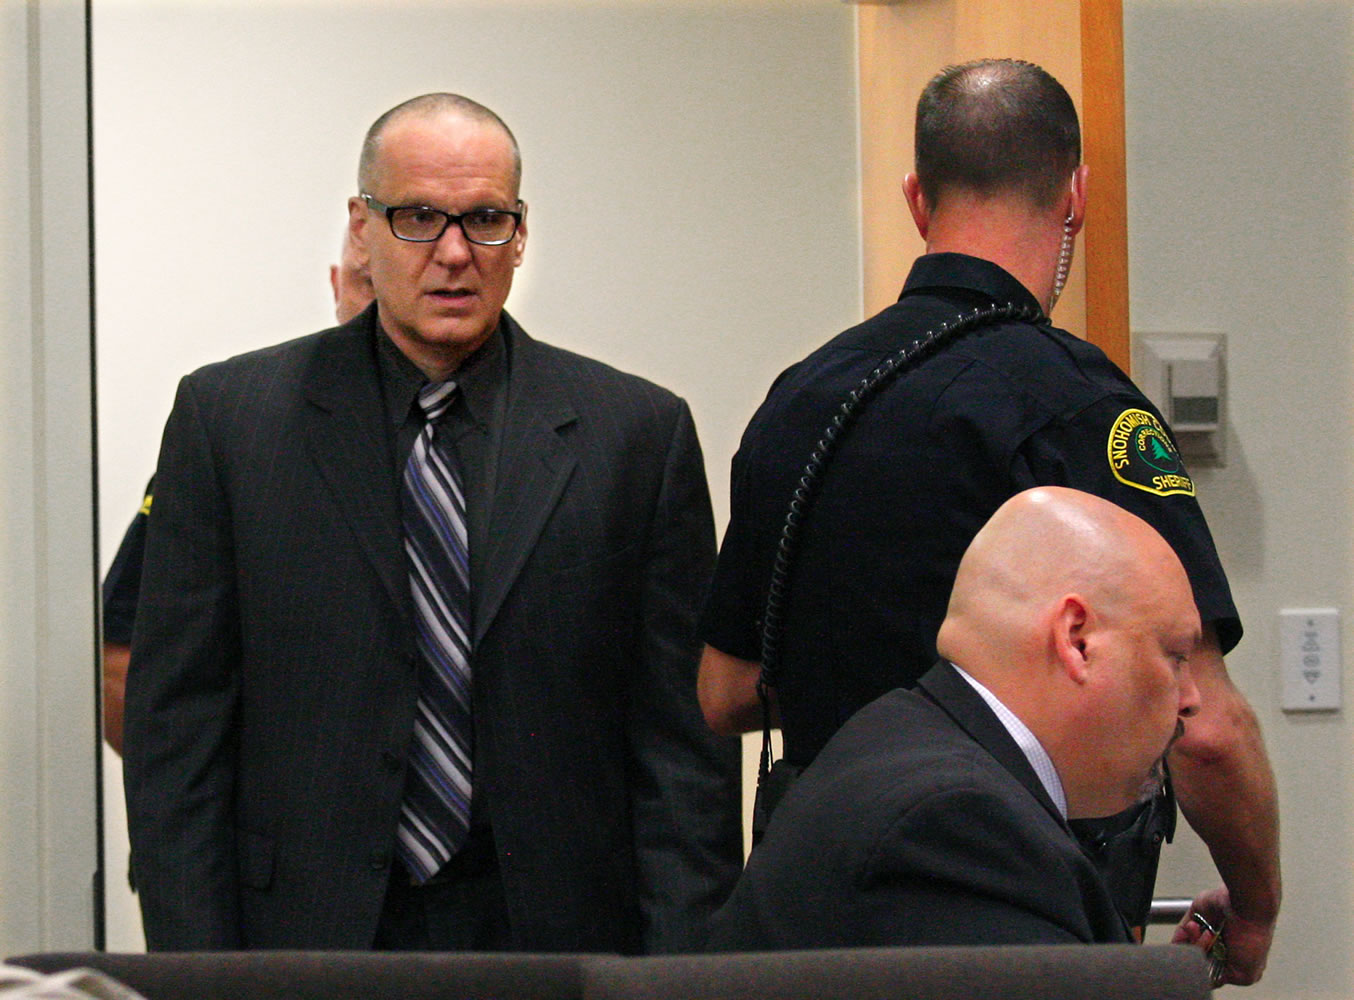 Byron Scherf, left, is escorted into a Snohomish County courtroom in Everett for his murder trial on May 1.